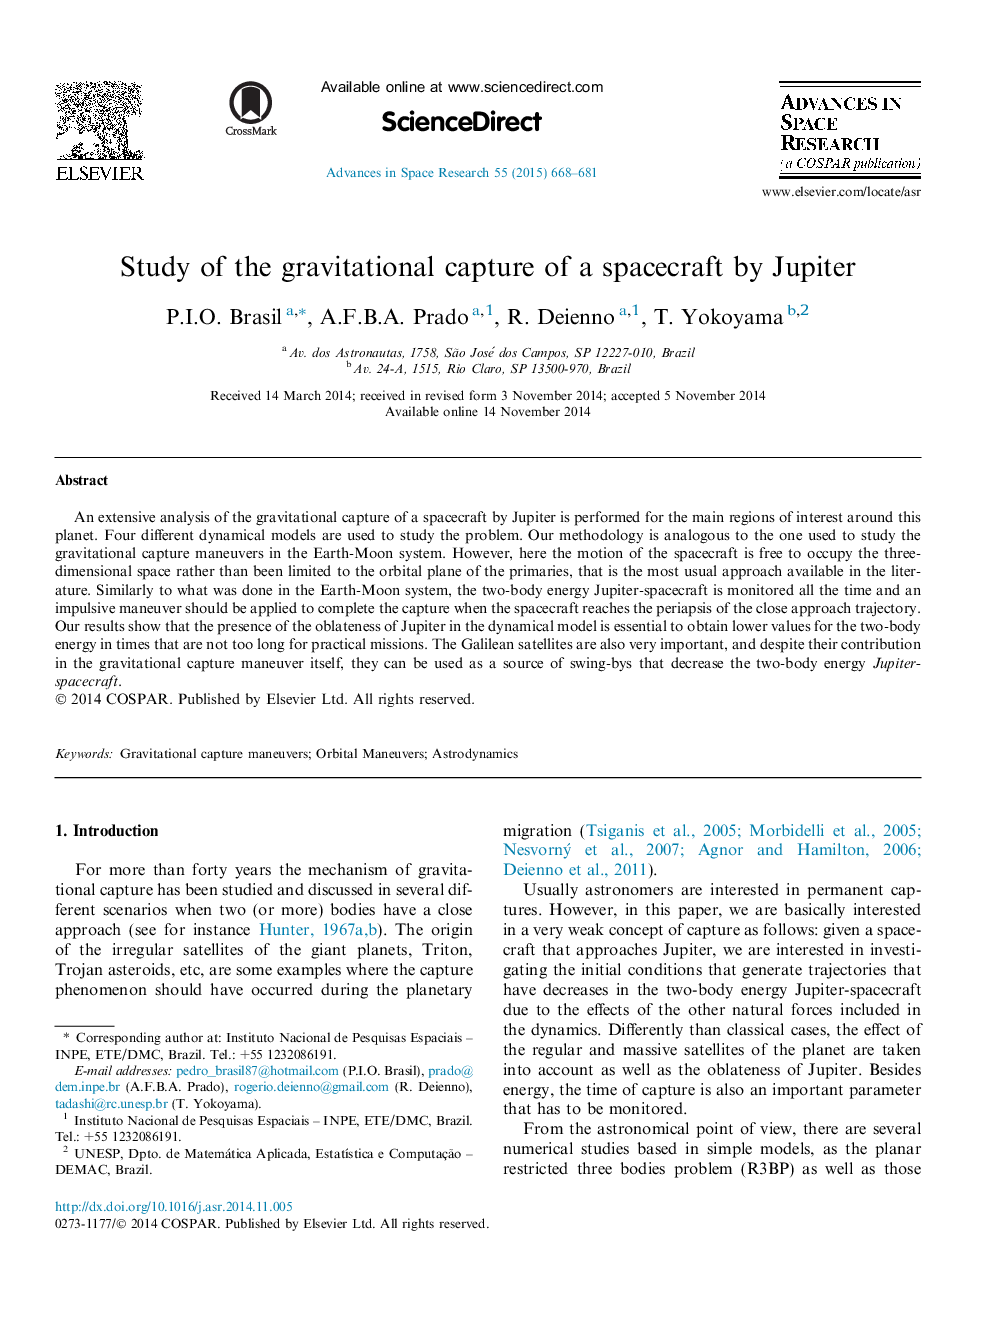 Study of the gravitational capture of a spacecraft by Jupiter